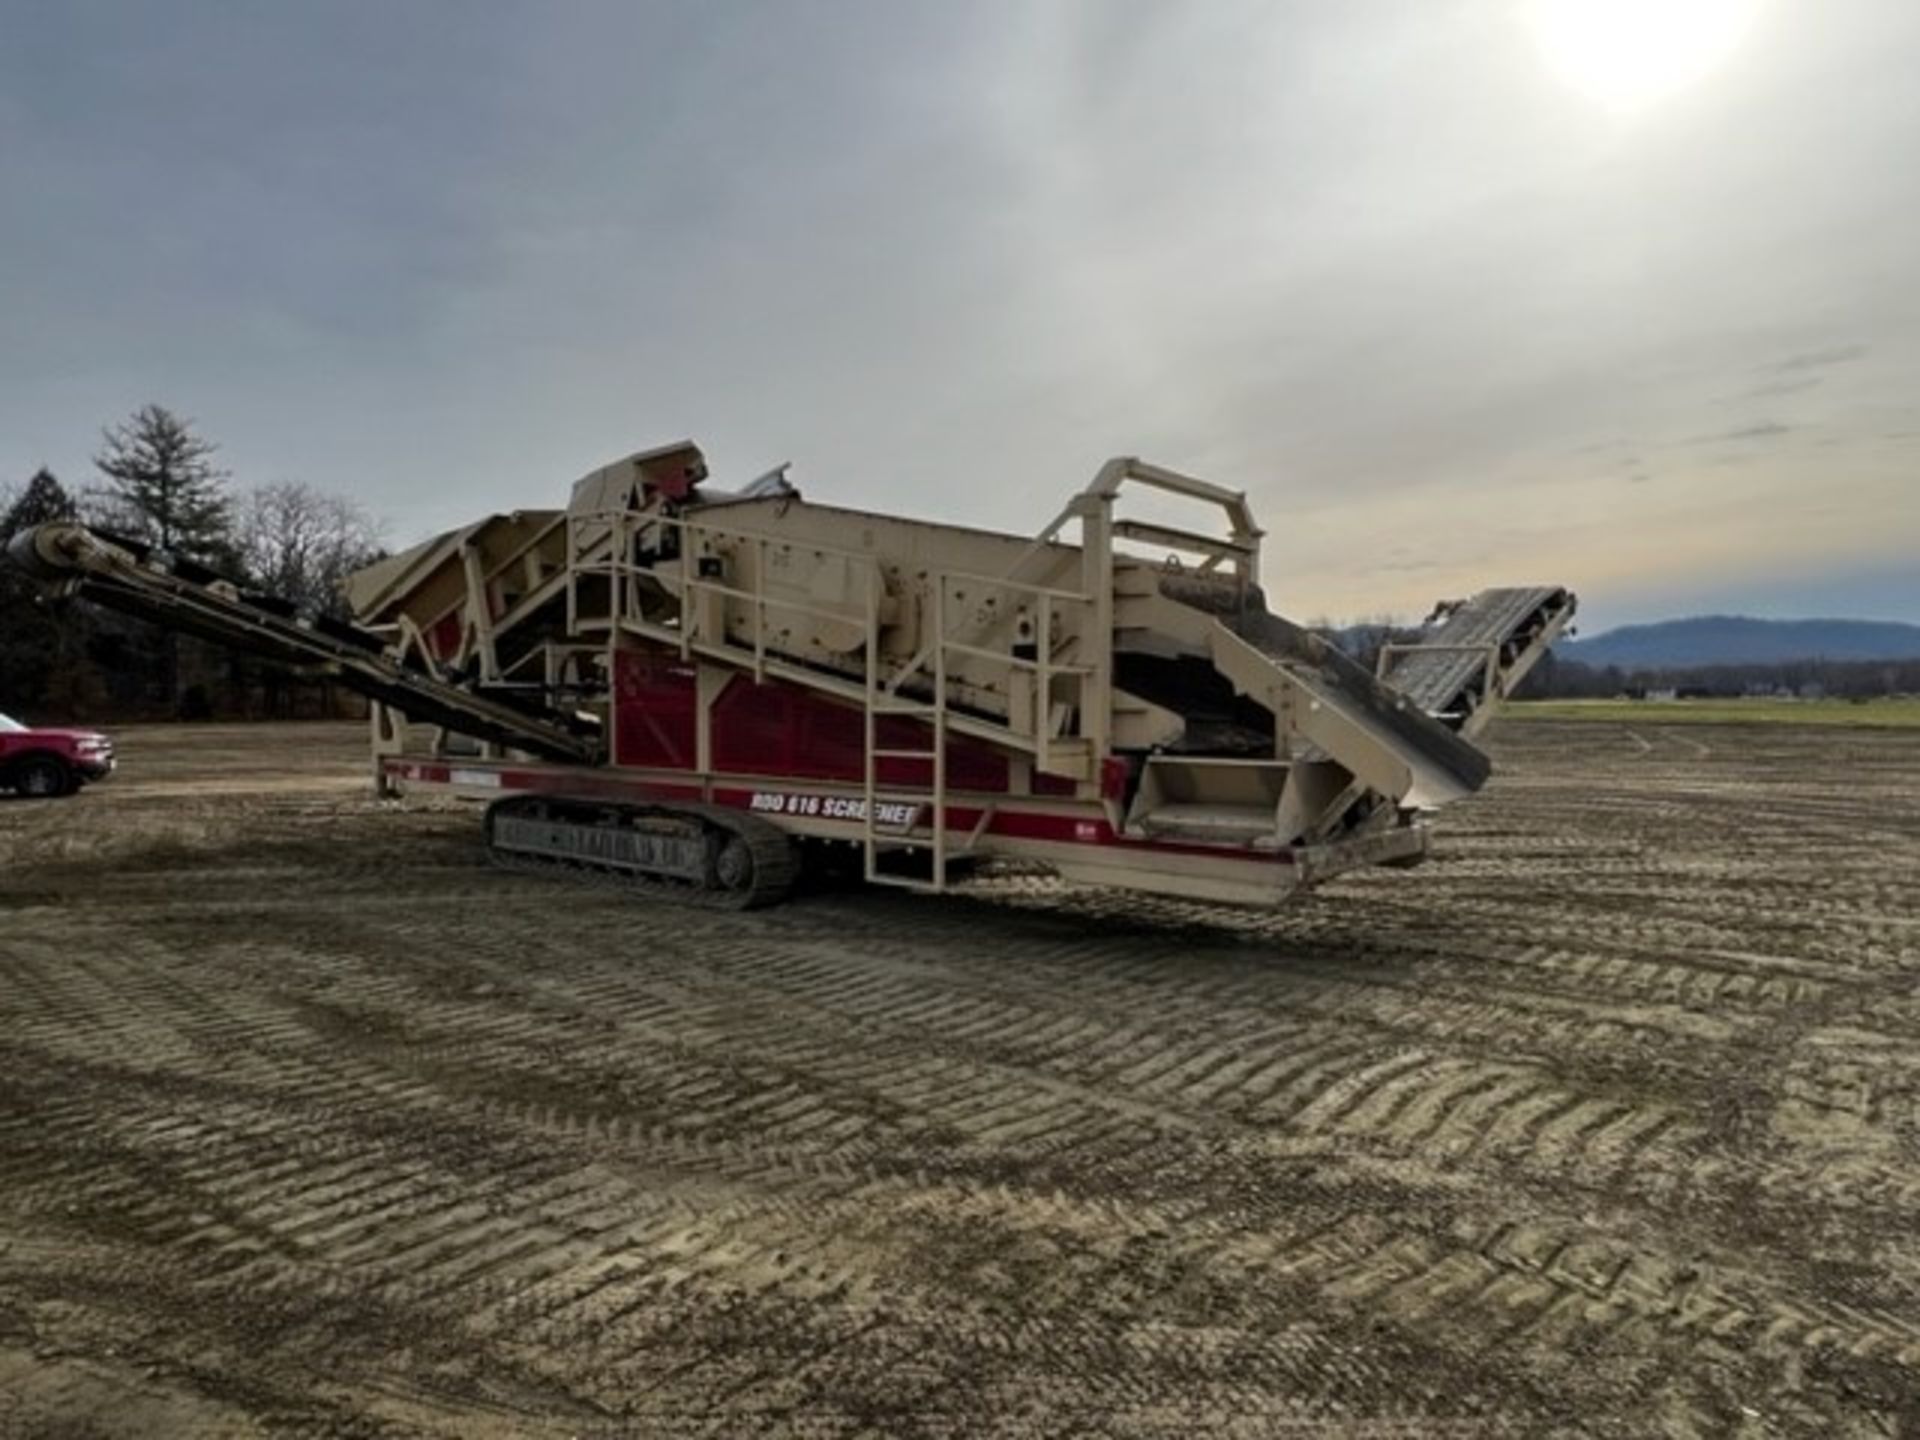 2020 R.D. Olson #616 Portable Rubber Track Screener, 6' x 16' Deck with Cat Diesel 74 HP C3.4B Motor - Image 4 of 6